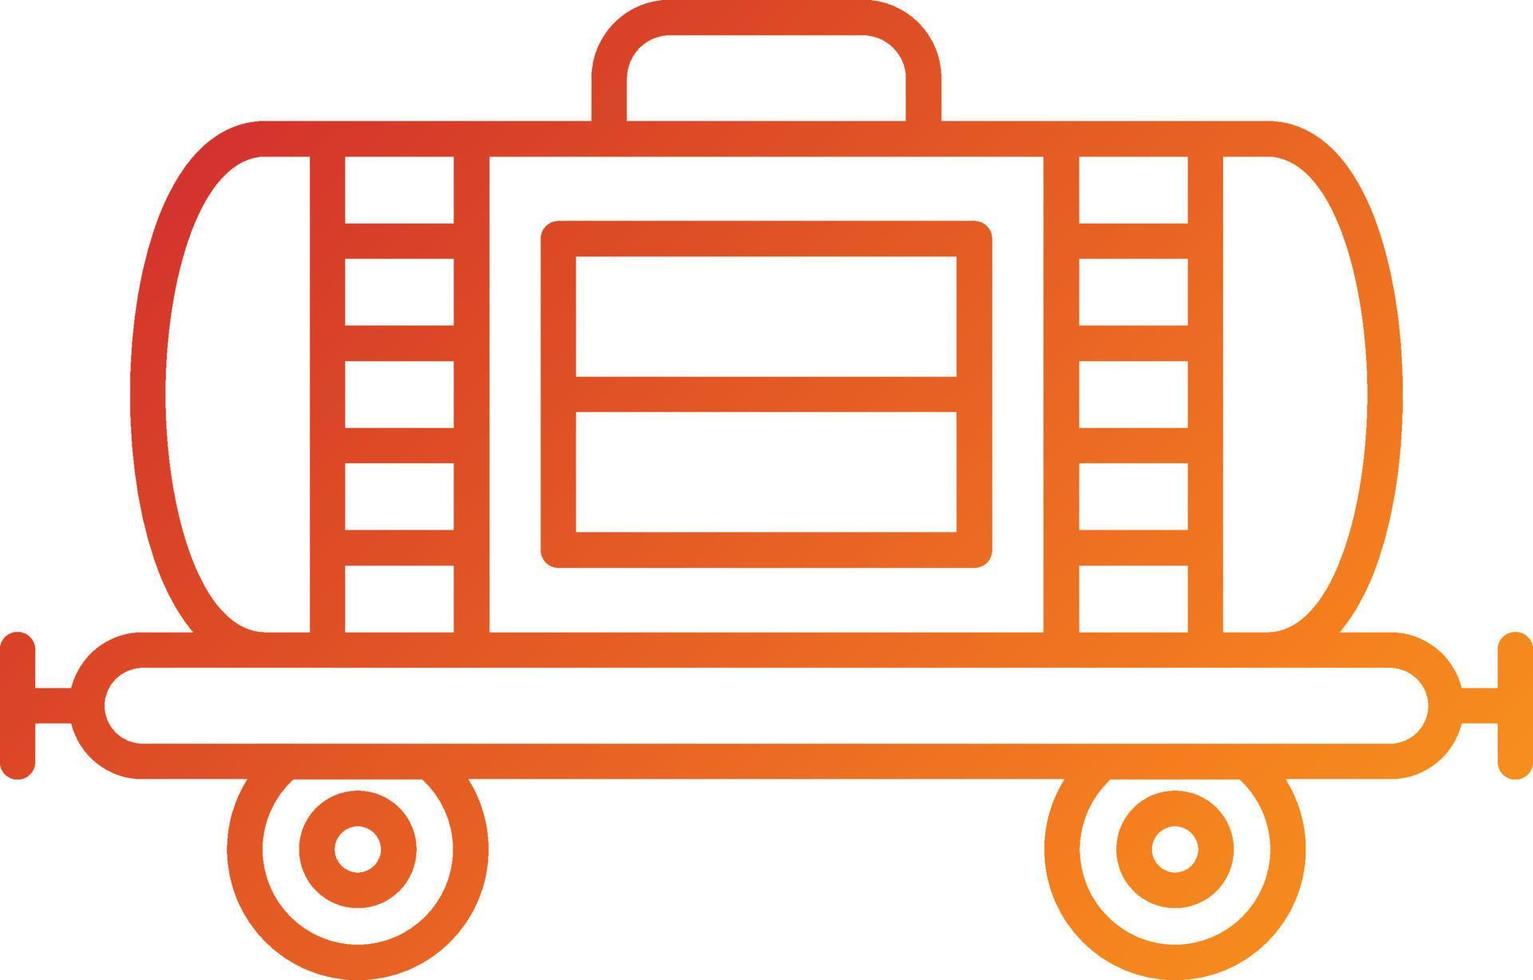 Industry Wagon Icon Style vector